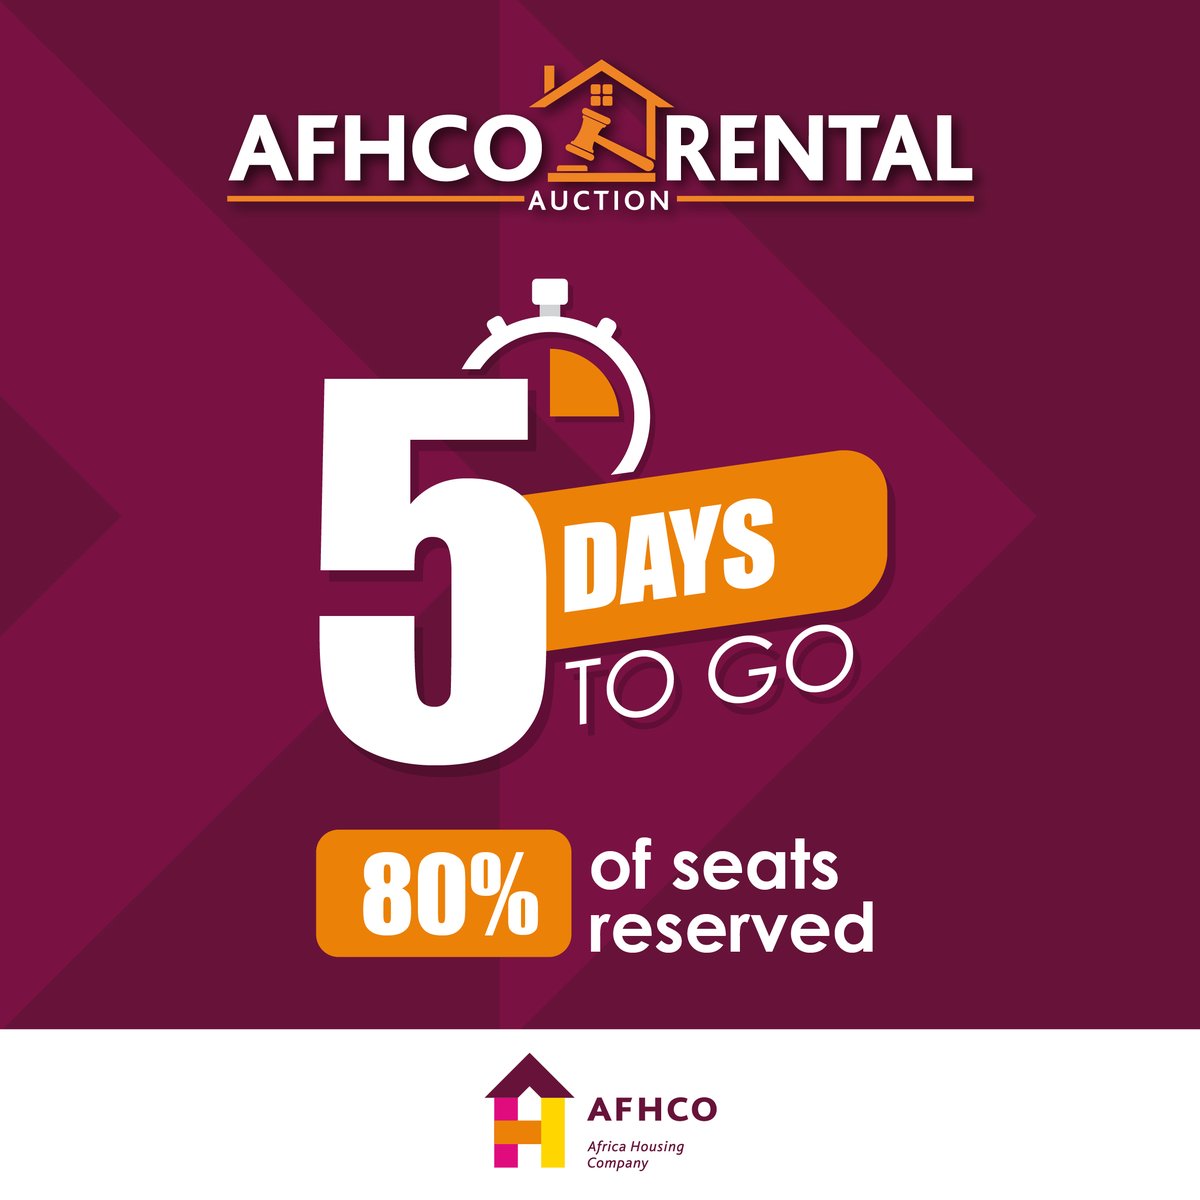 Get your dream apartment! With Rental Auction, you can find apartments for unbeatable prices. Follow this link to book your seat: bit.ly/49TGaNN #Rental #AFHCORentalAuction #innercityrentals #cityliving #MoveUp #StaywithAFHCO #apartmentstolet #MoveUpwithAFHCO #AFHCO